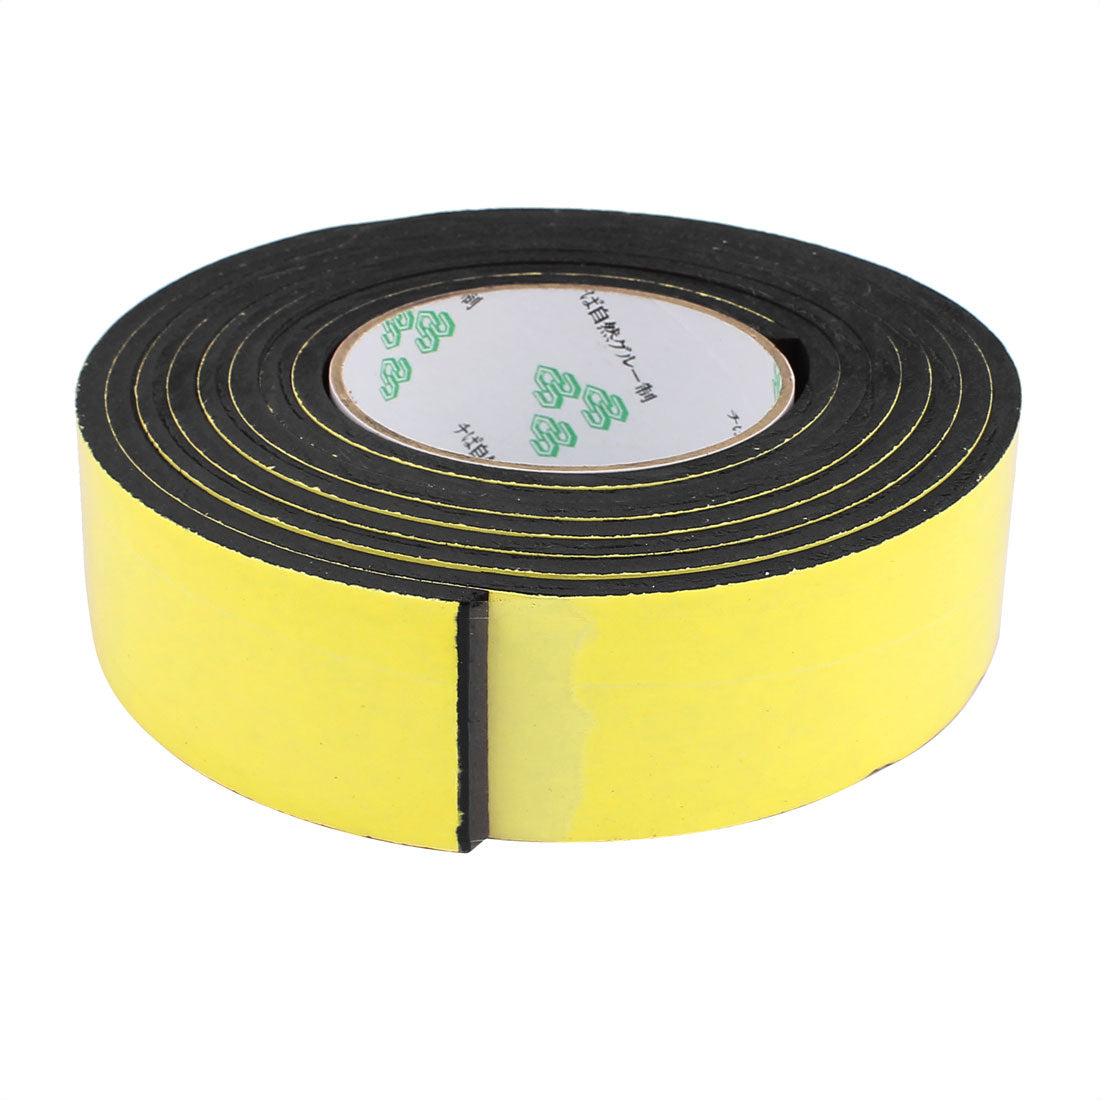 uxcell Uxcell 45mm x 5mm Single Sided Self Adhesive Shockproof Sponge Foam Tape 3 Meters